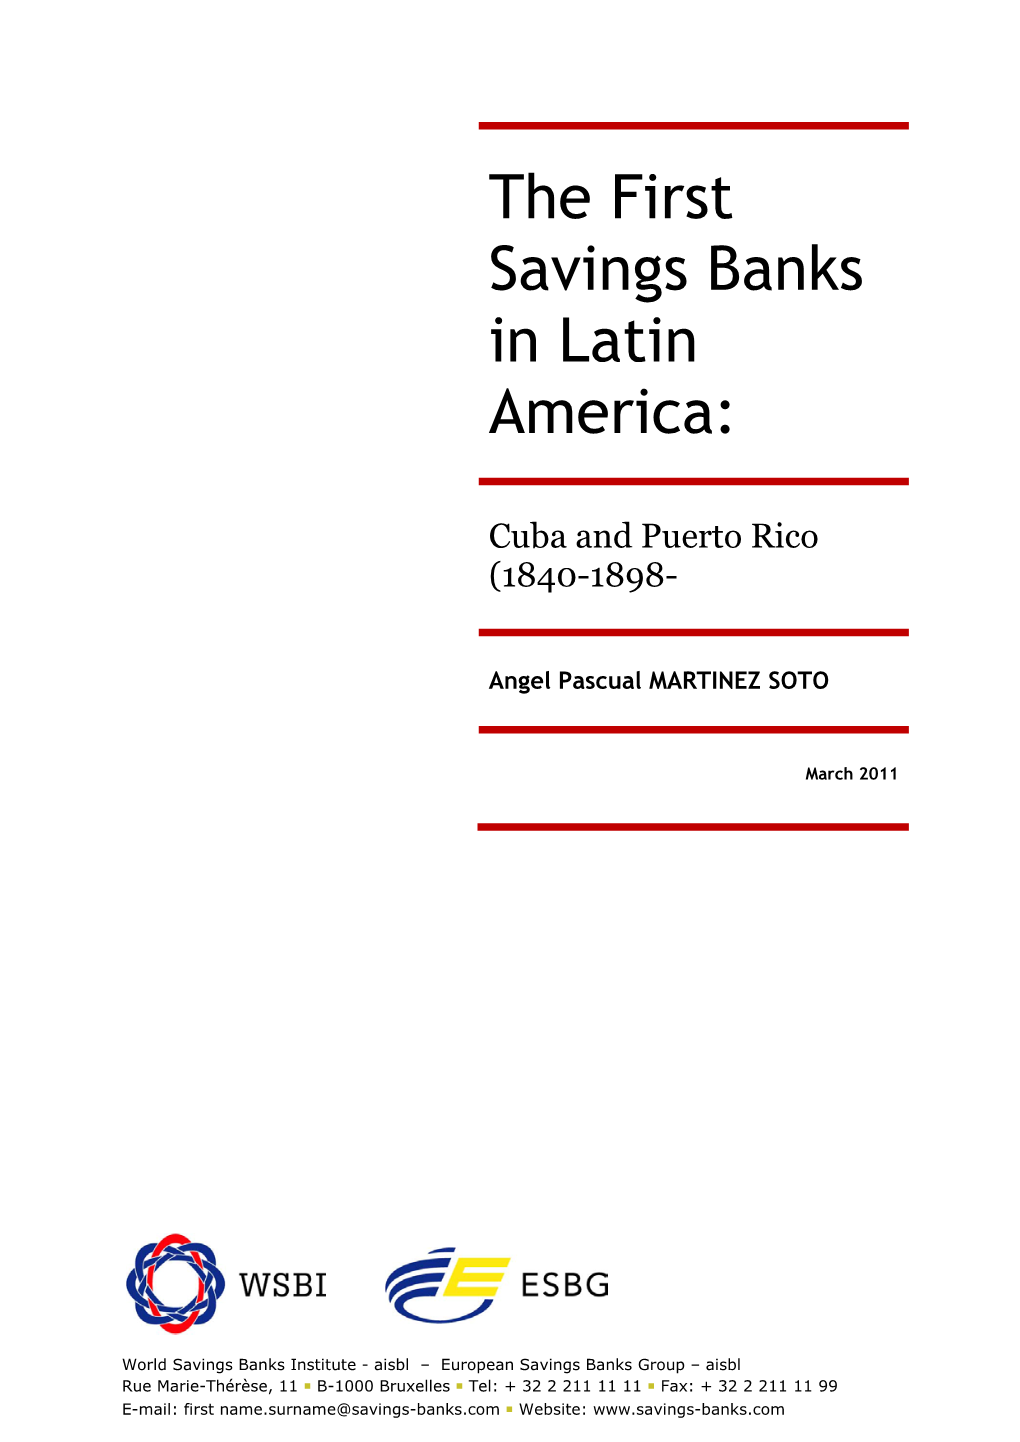 The First Savings Banks in Latin America